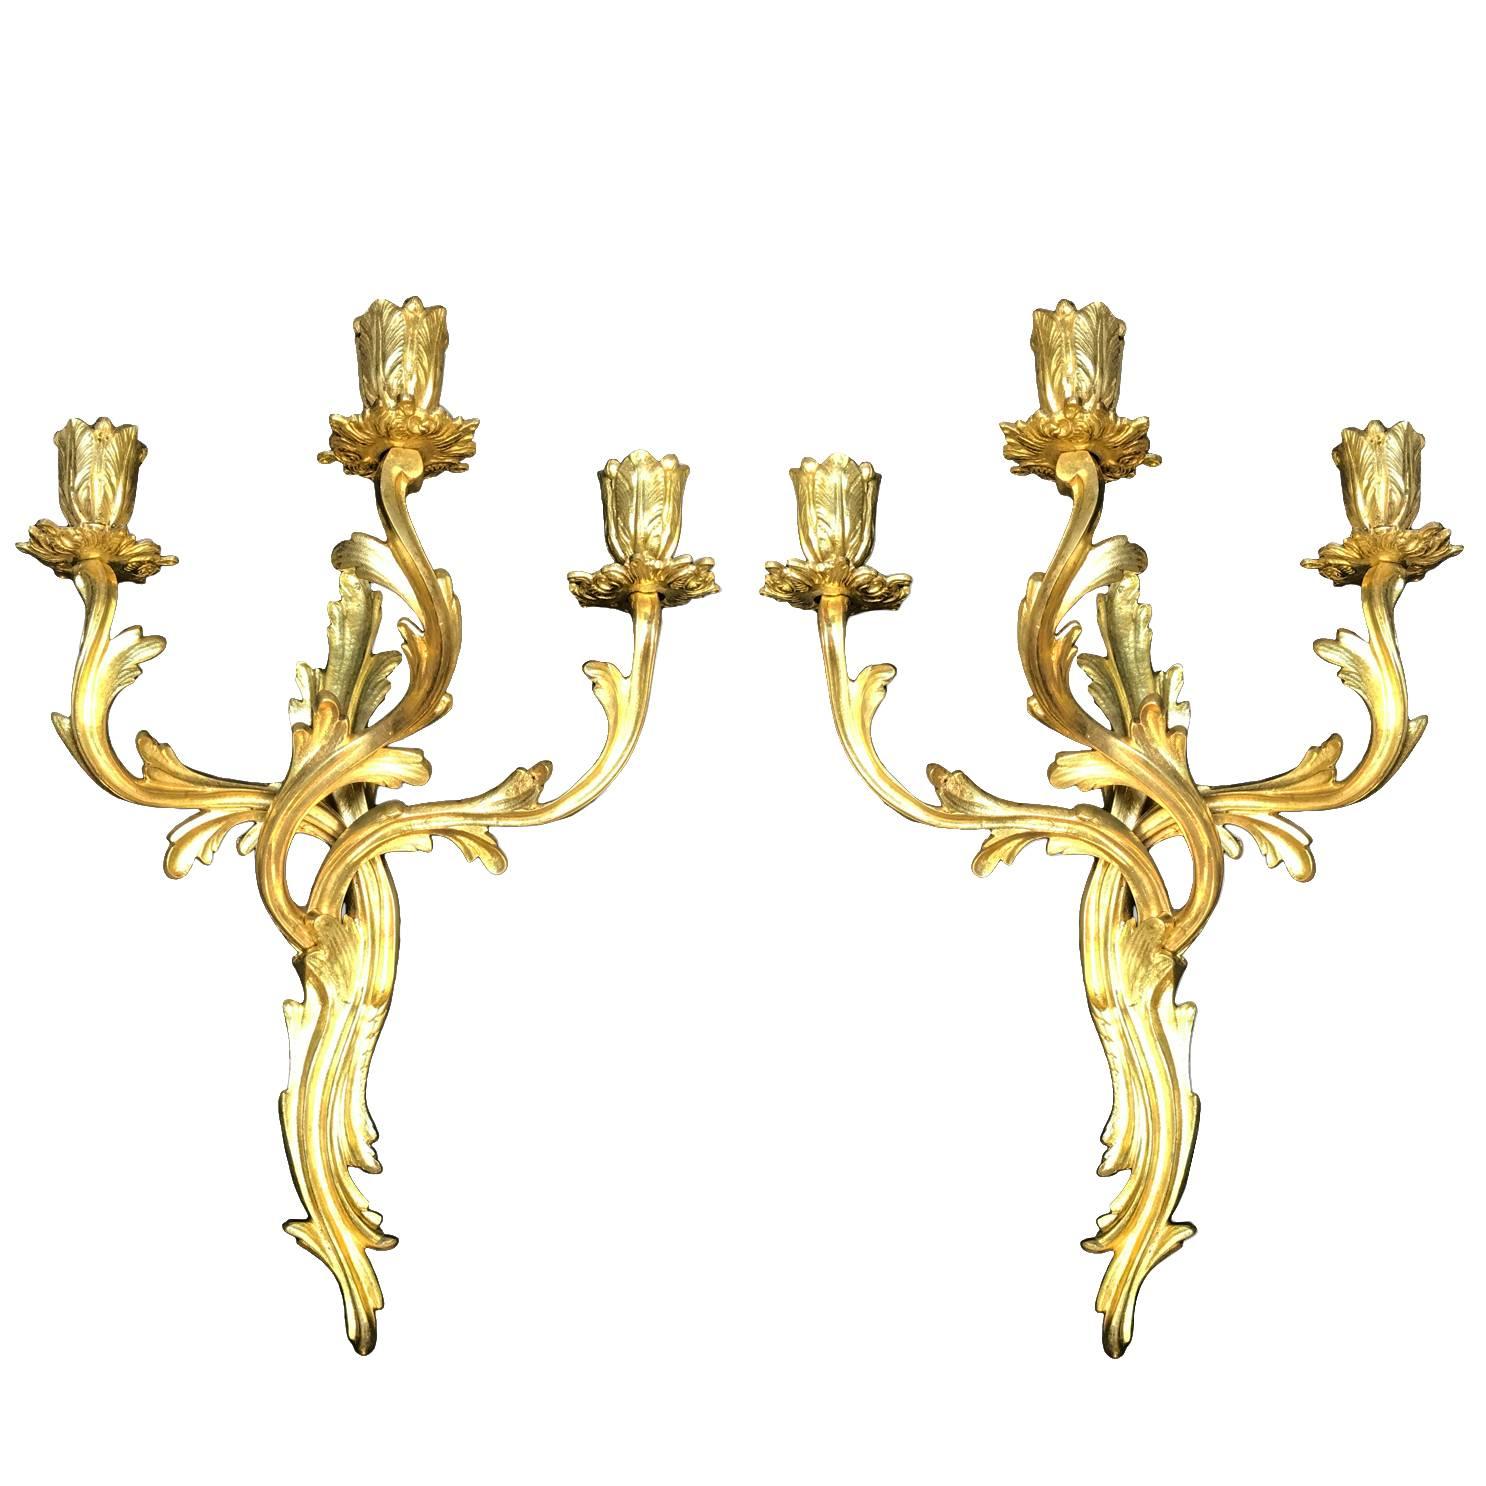 Pair of French Gilt Bronze Sconces Louis XV Style Three-armed Wall Candelabra For Sale 3